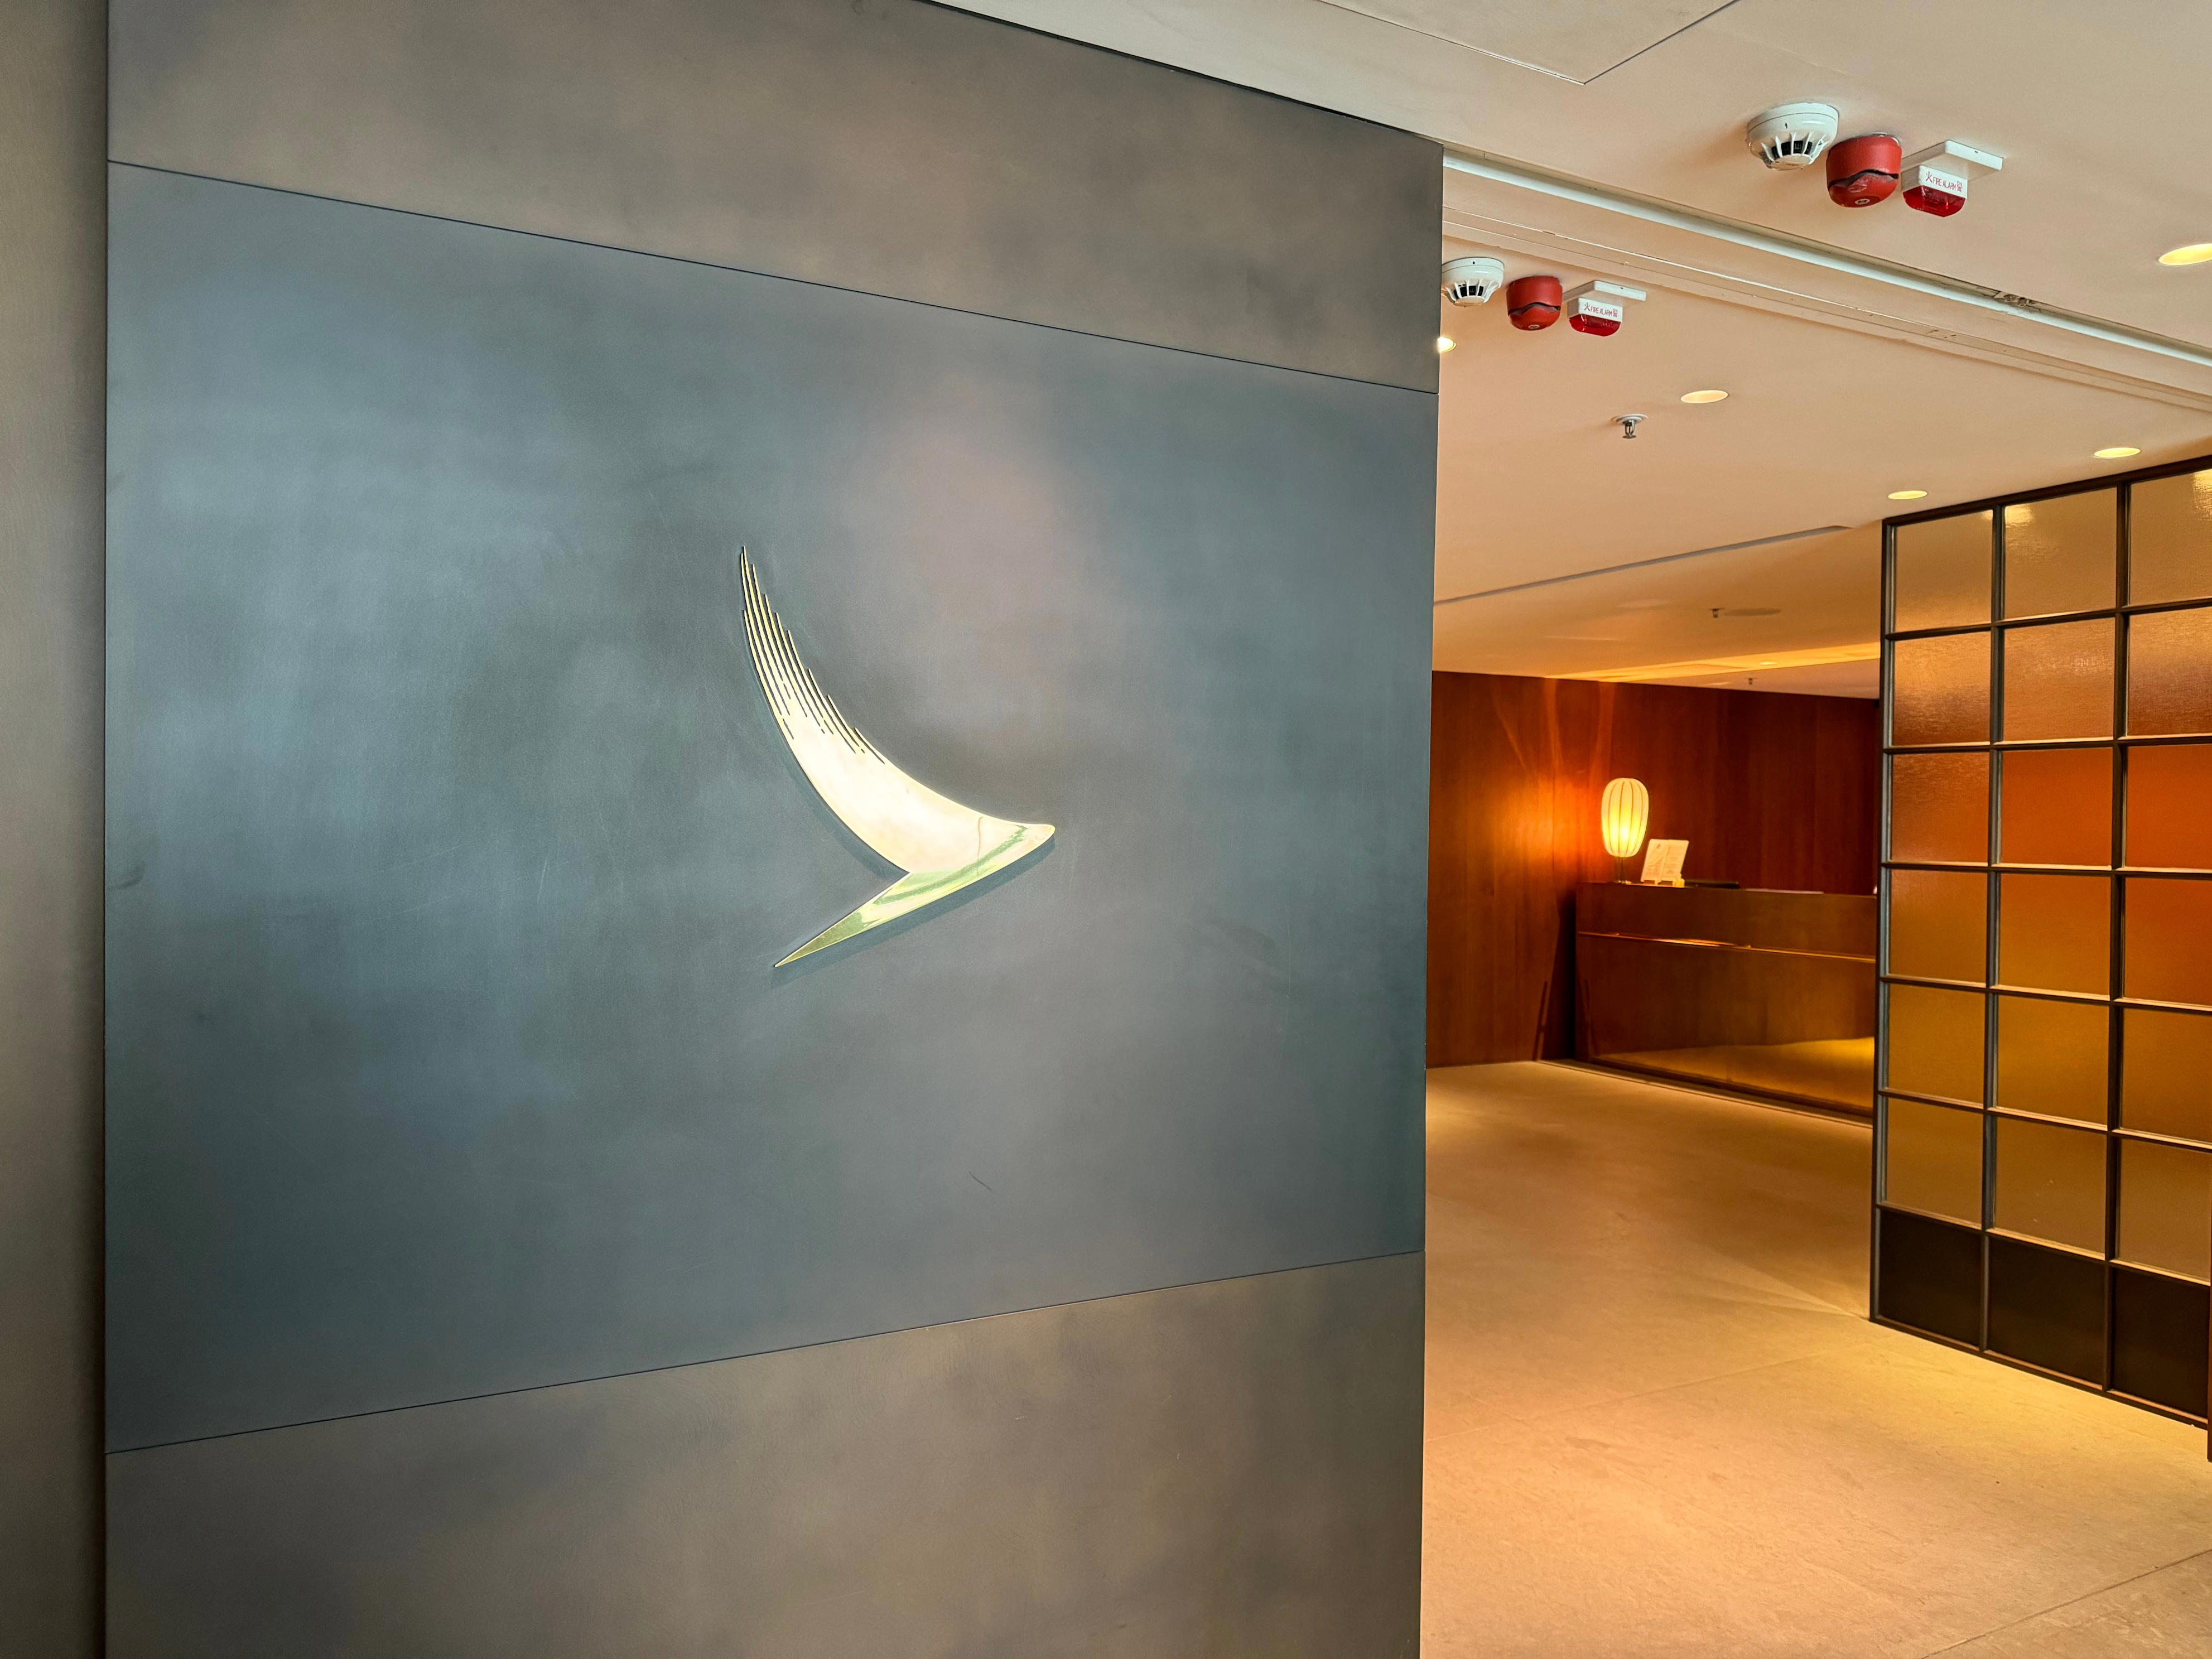 <p>Cathay Pacific has two lounges for first-class fliers in this airport — The Wing and The Pier — but the latter was closest to me, so I chose to visit it during my travels. </p><p>According to Cathay Pacific's website, the lounge is available from 5:30 a.m. to 12:30 a.m. daily. It's located in terminal one, near gate 63.</p><p>To enter the lounge, I scanned my boarding pass at the check-in station. Unlike other lounges that I've been to, there was no line or overcrowding. I was able to walk right in. </p><p>From the moment I entered, it felt like a <a href="https://www.businessinsider.com/british-airways-first-class-suite-review-photos-2023-7">premium airport lounge experience</a>.</p>